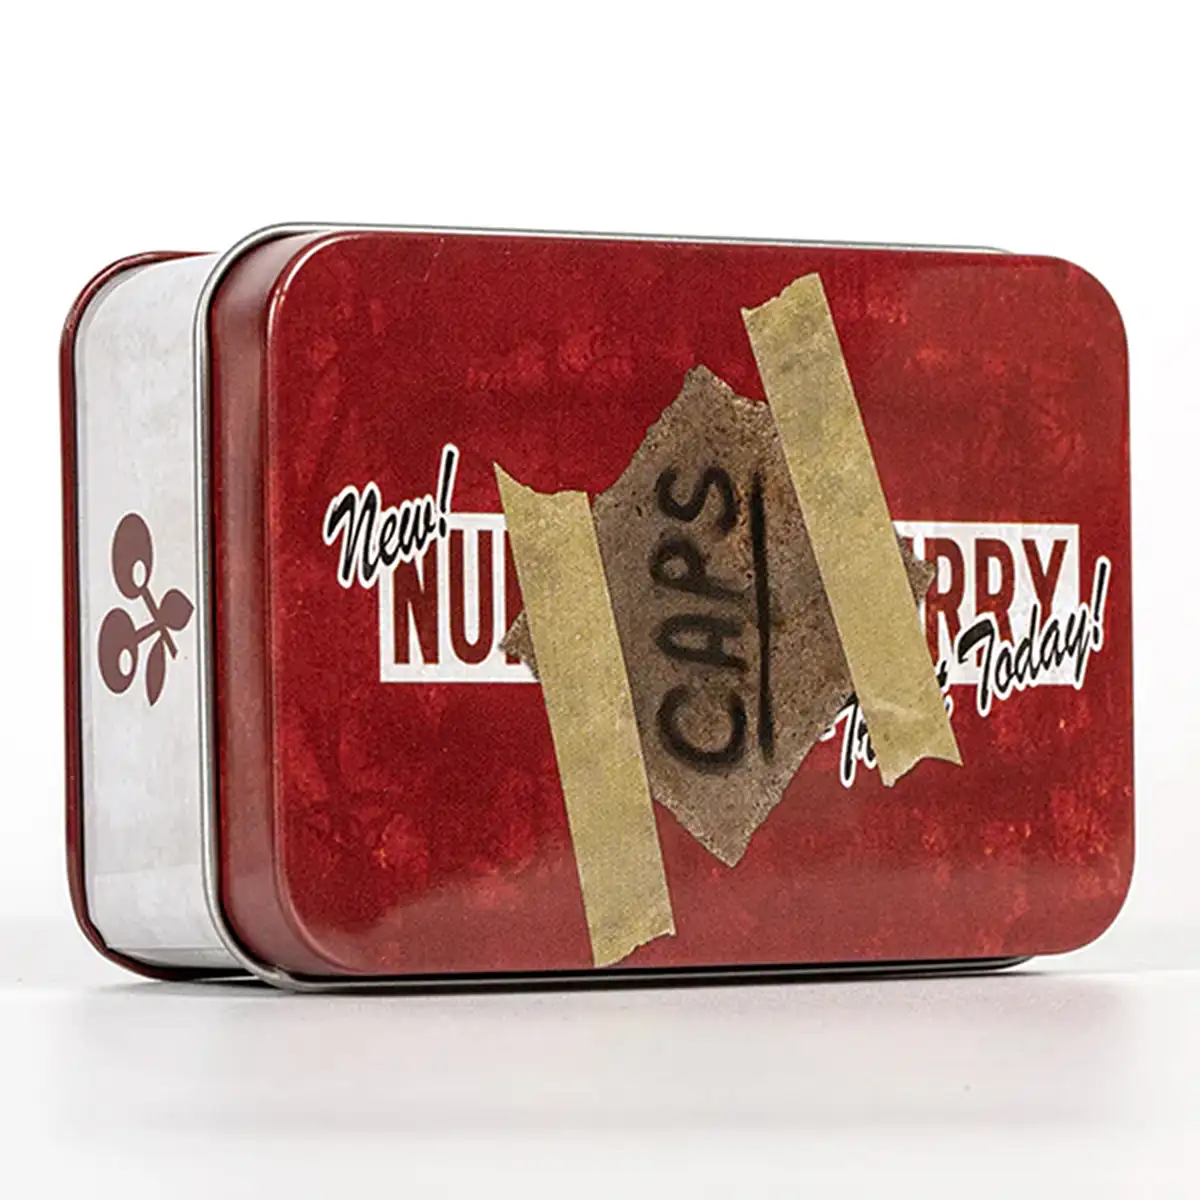 Fallout Bottle Cap Series "Nuka Cola Cherry" with Collection Tin Image 5